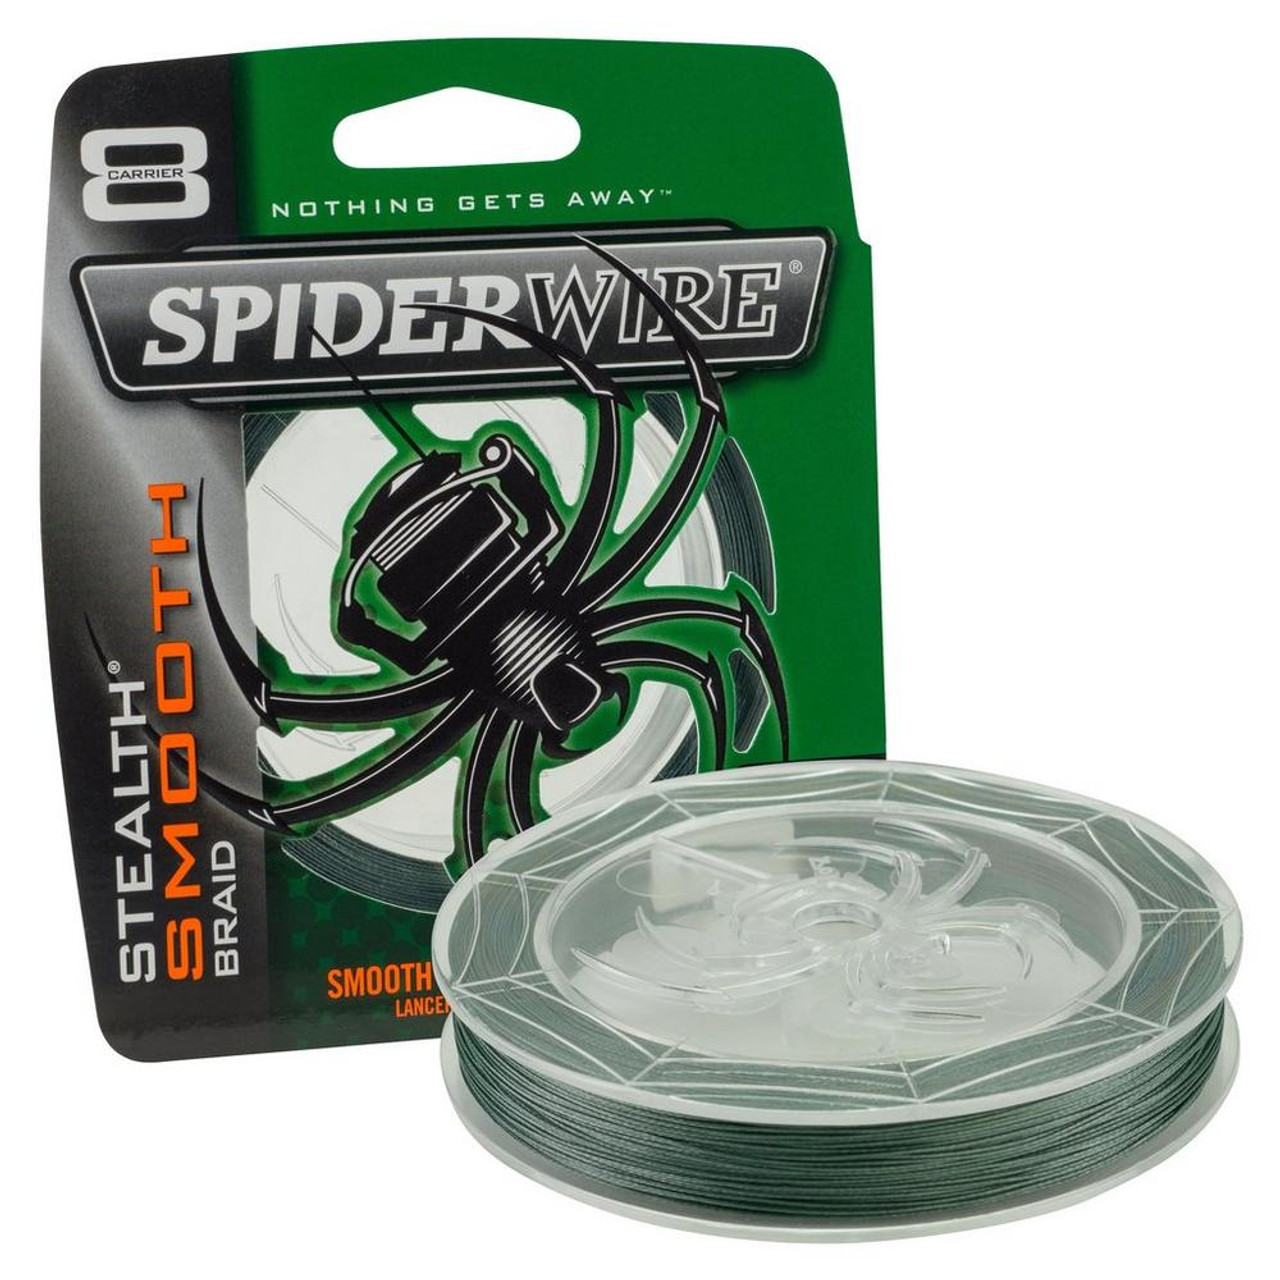 Spiderwire Stealth Smooth 0.013 Braided 125 yd Filler Spool, Moss Green